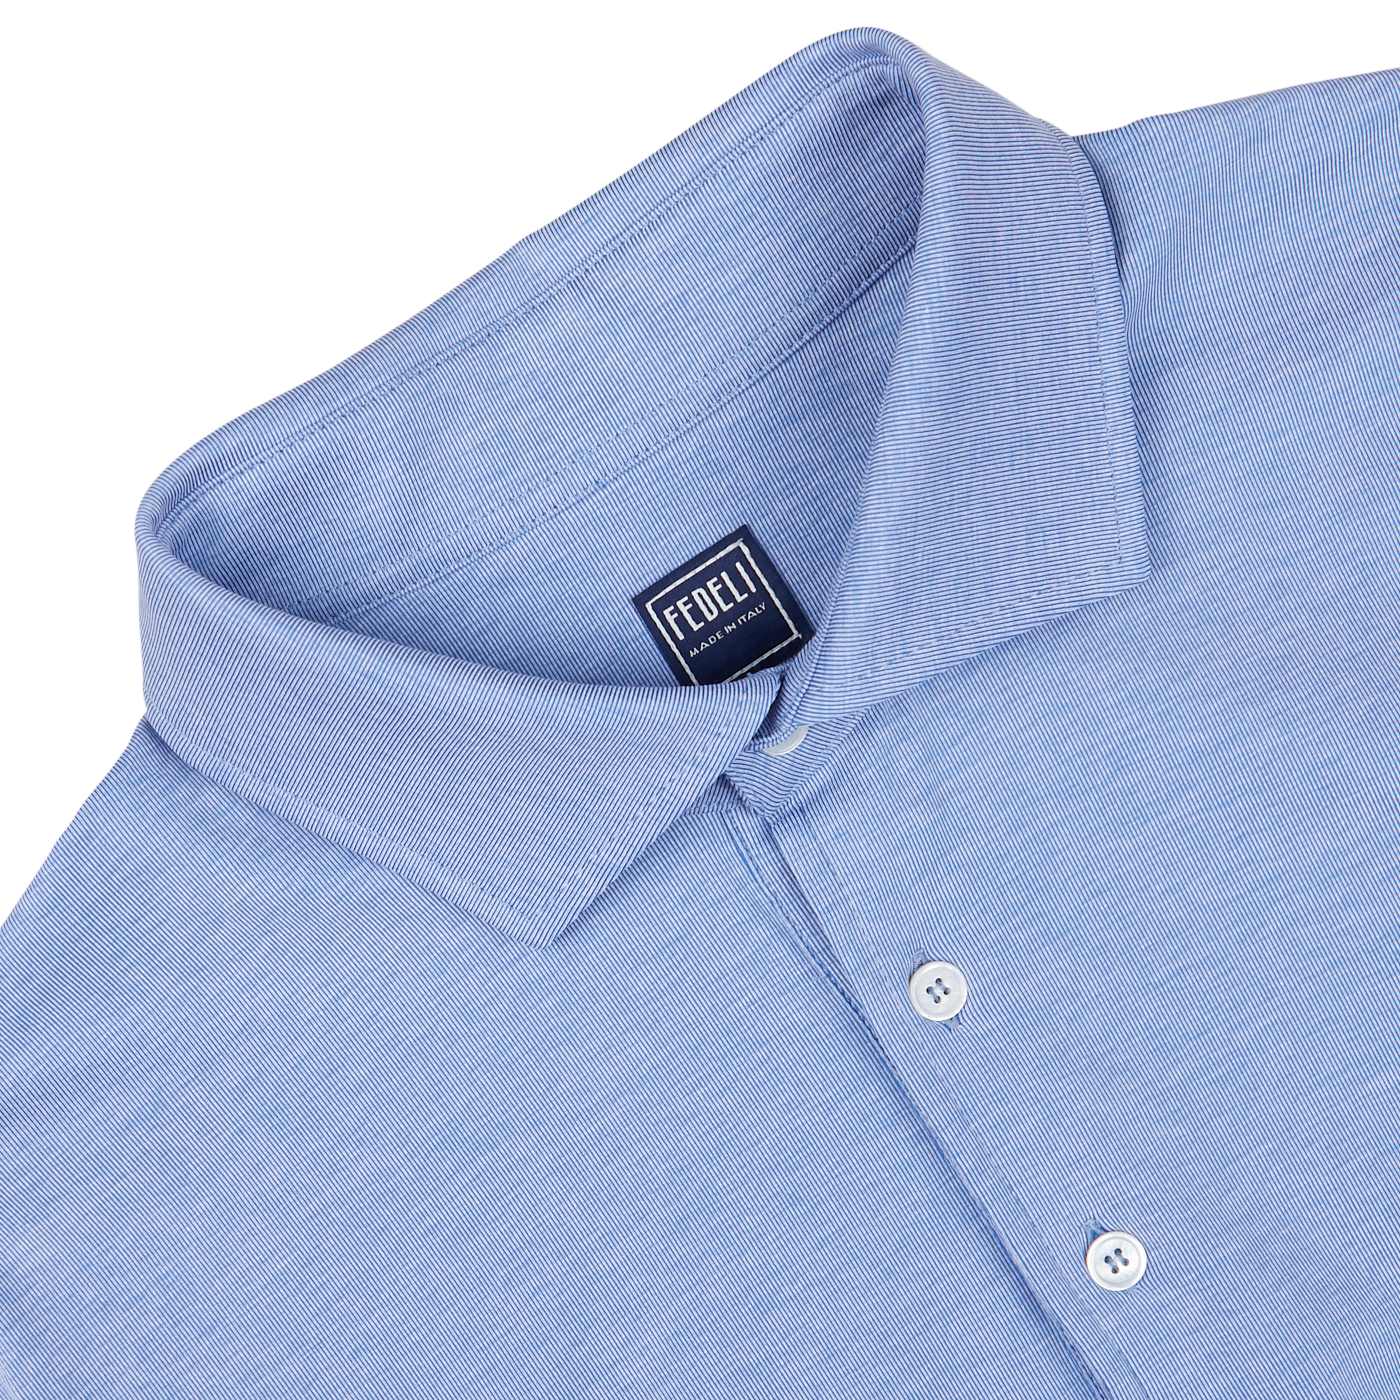 Light Blue Fil-a-Fil Cotton Jersey Polo Shirt with a collar and buttons on a white background by Fedeli.